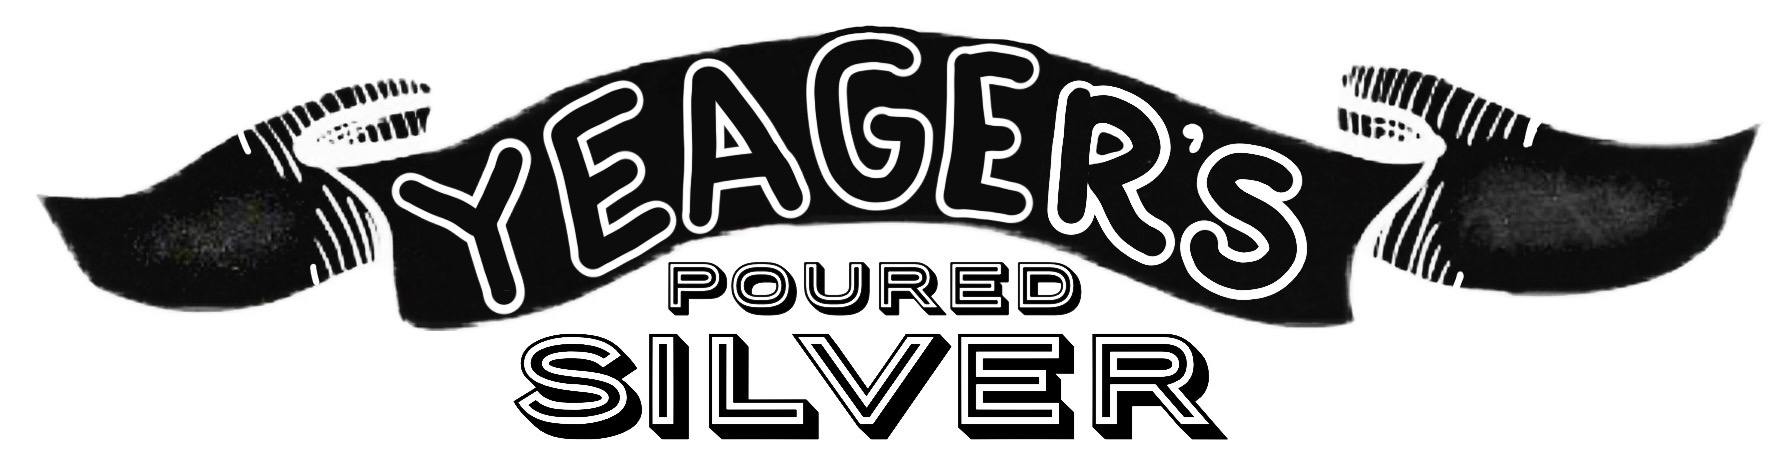 Yeagers Poured Silver Logo